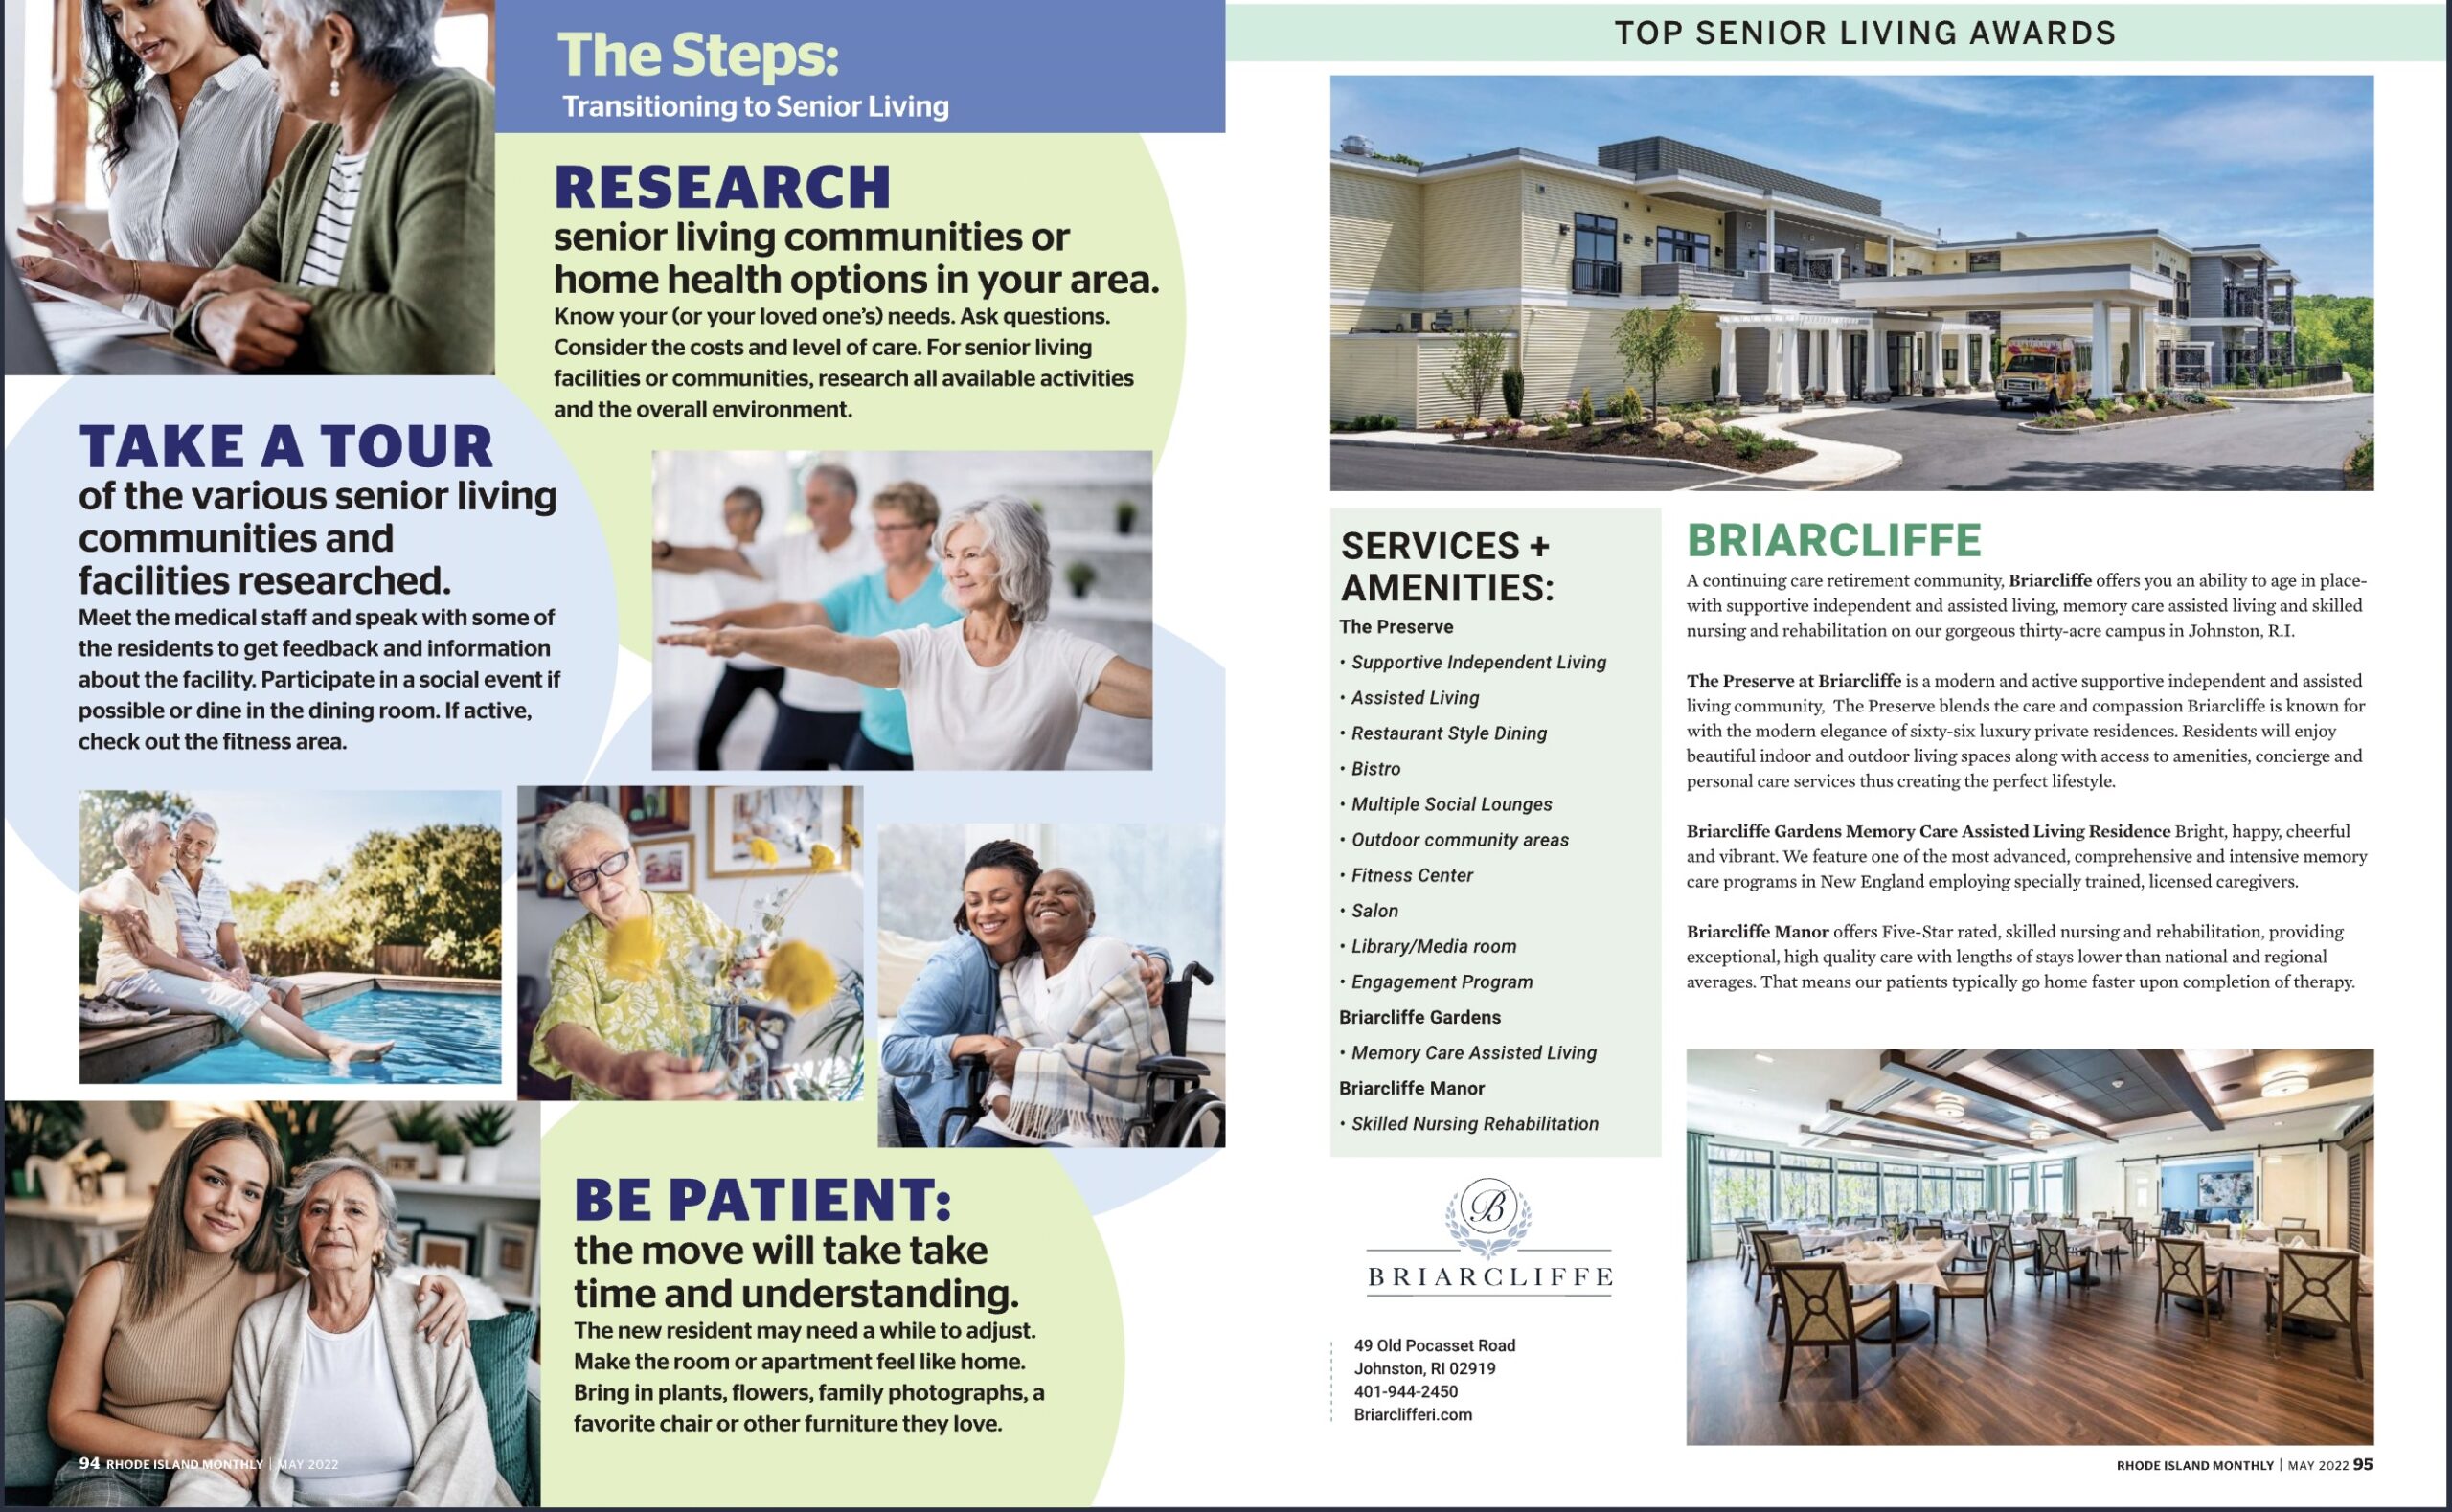 Briarcliffe Named Top Senior Living Community by RI Monthly Magazine- again!